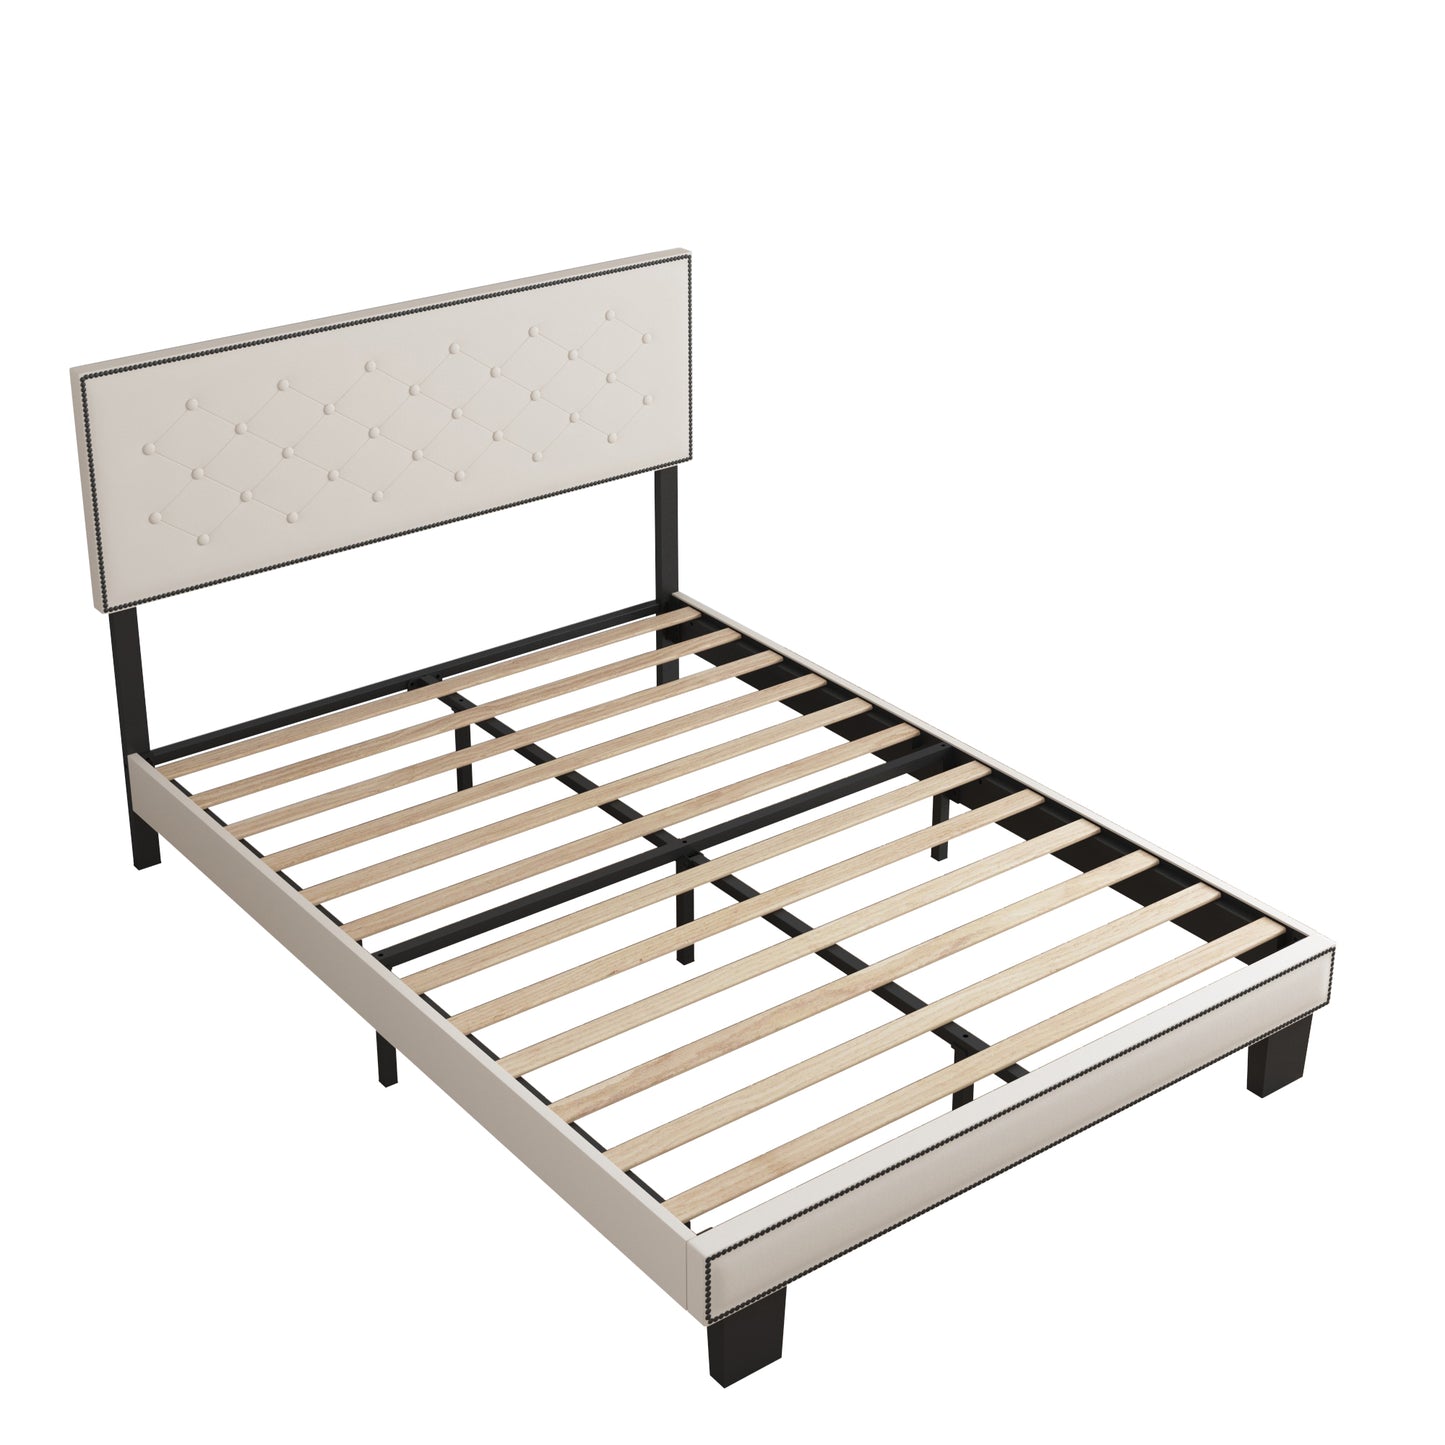 SYNGAR Upholstered Fabric Platform Bed Frame Full Size with Button Tufted and Height Adjustable Headboard, Metal Frame Mattress Foundation with Strong Wooden Slat Support